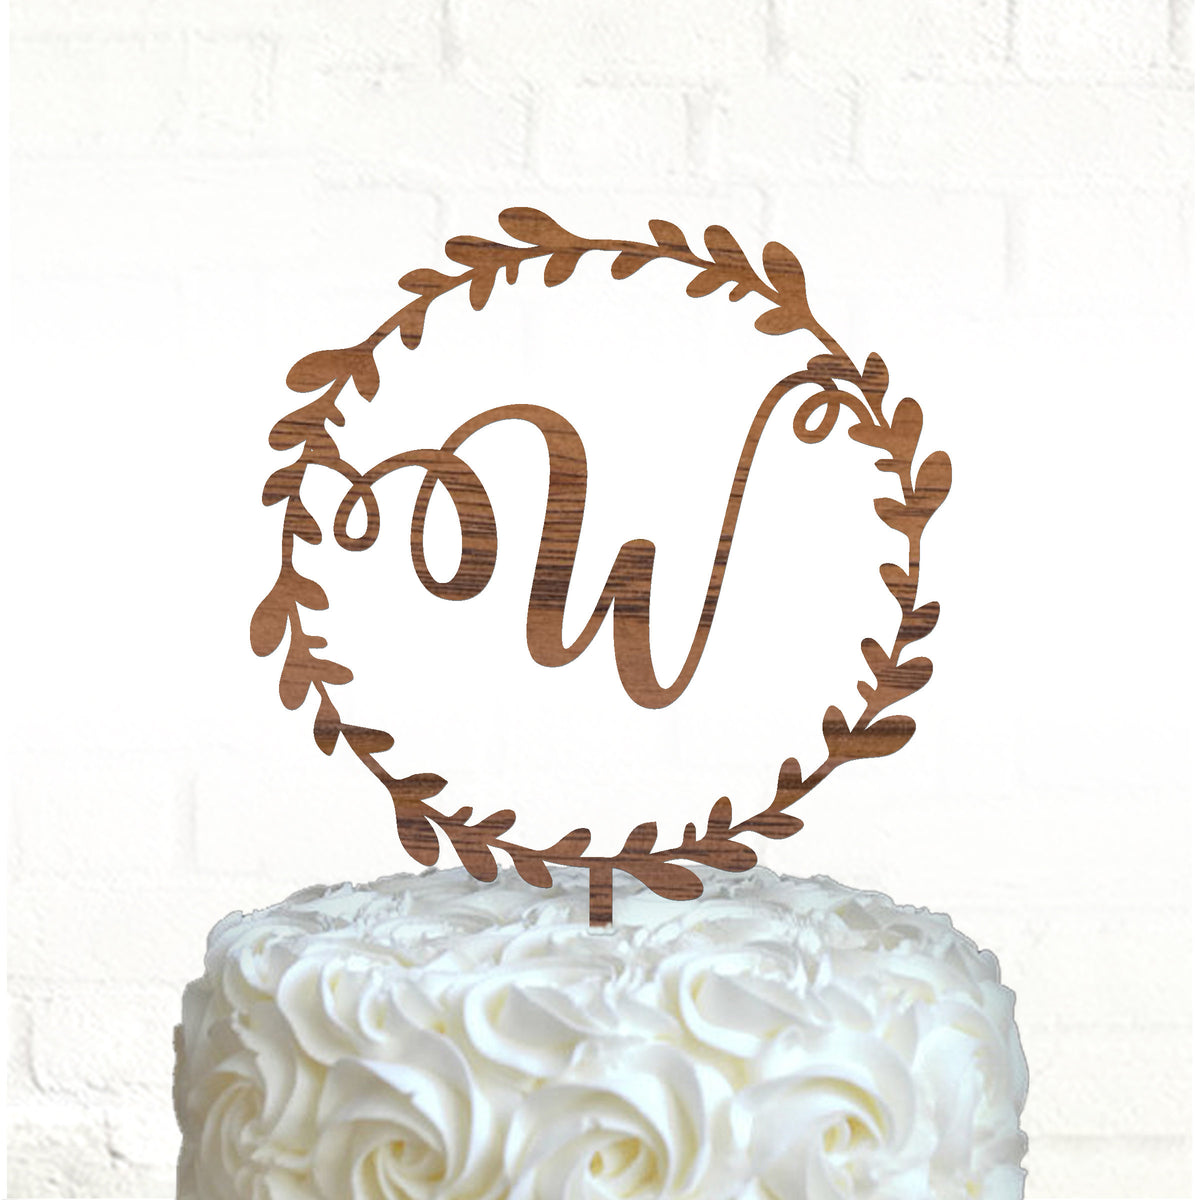 Wedding monogram cake topper, Wood cake topper / Laser cut, Wreath cake topper, Personalized cake topper, Rustic cake topper - RCH Gifts